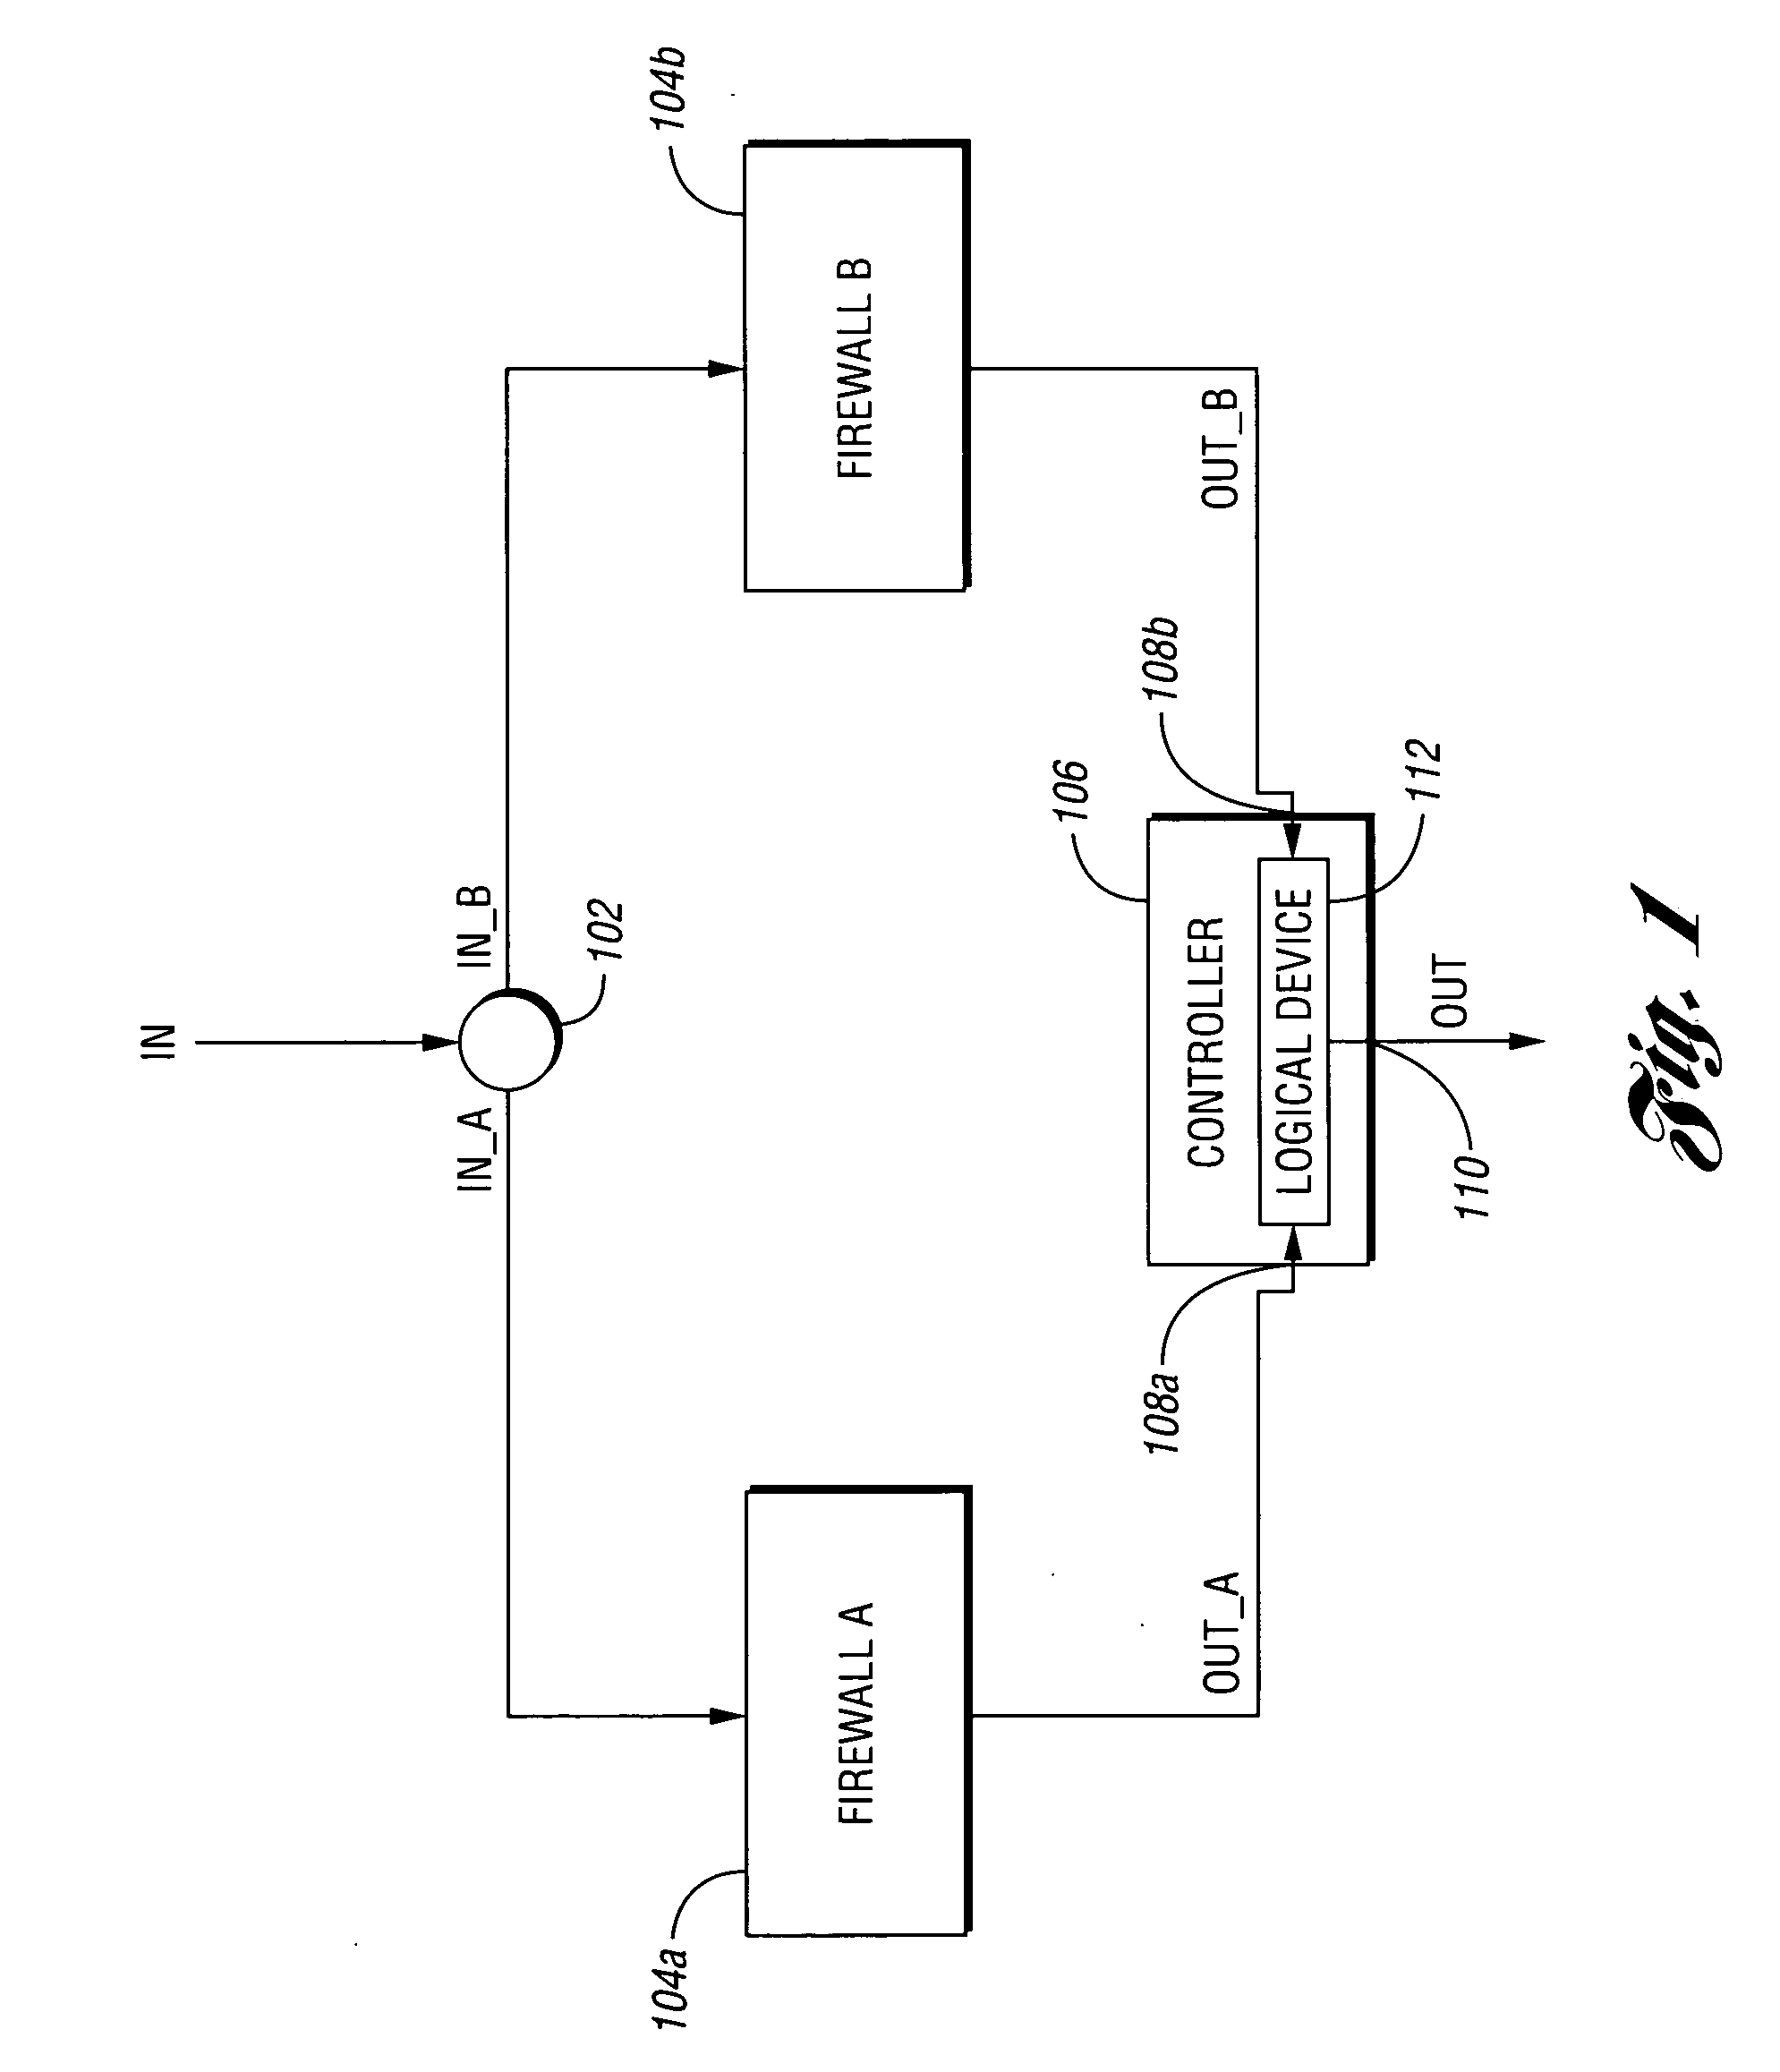 System and method for reducing data stream interruption during failure of a firewall device